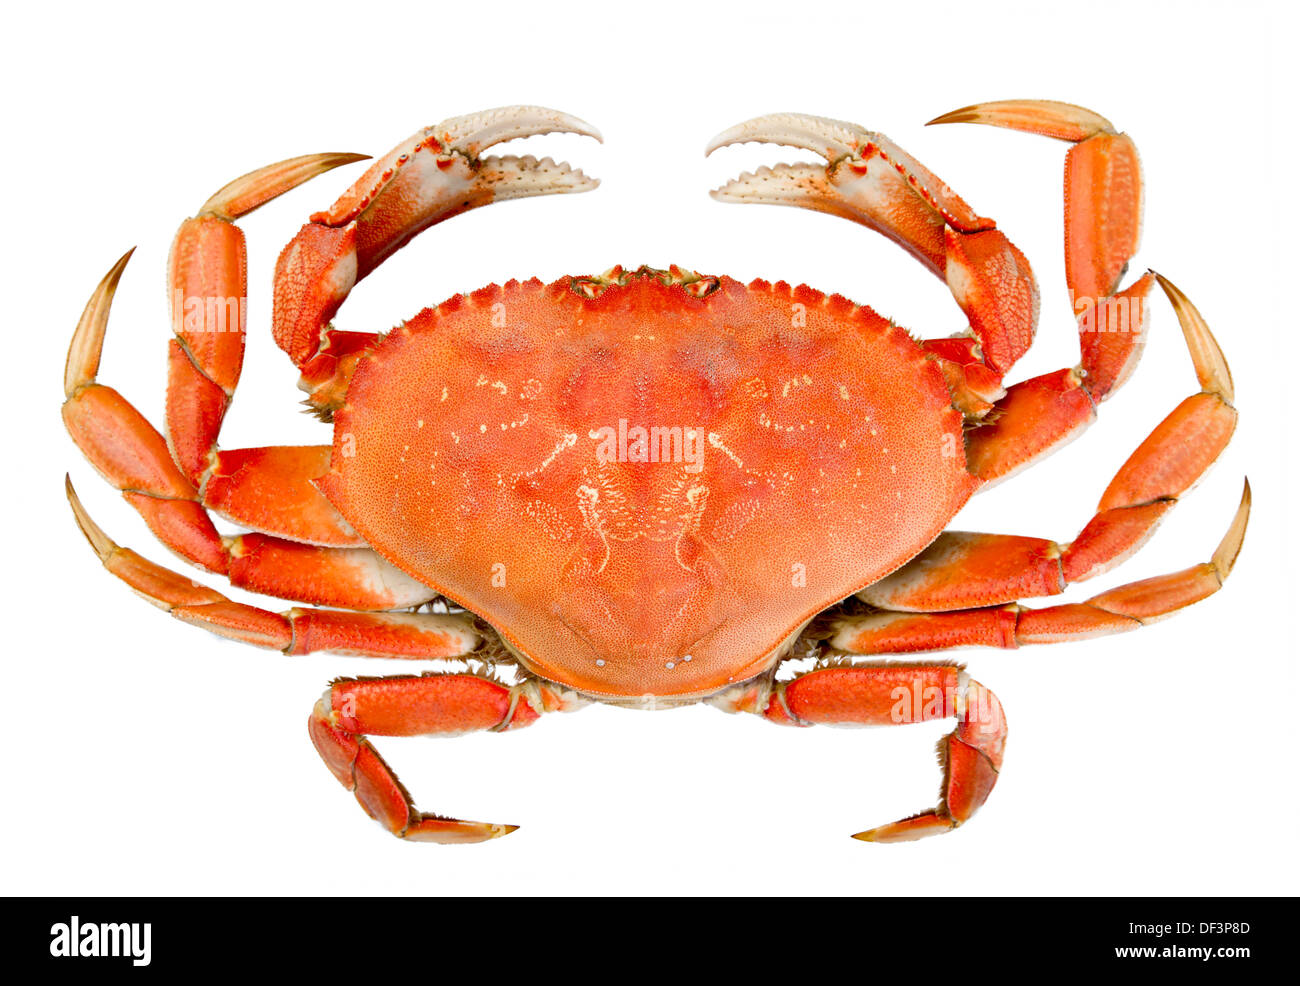 Cooked whole dungeness crab with natural marks on the shell and isolated on white background Stock Photo